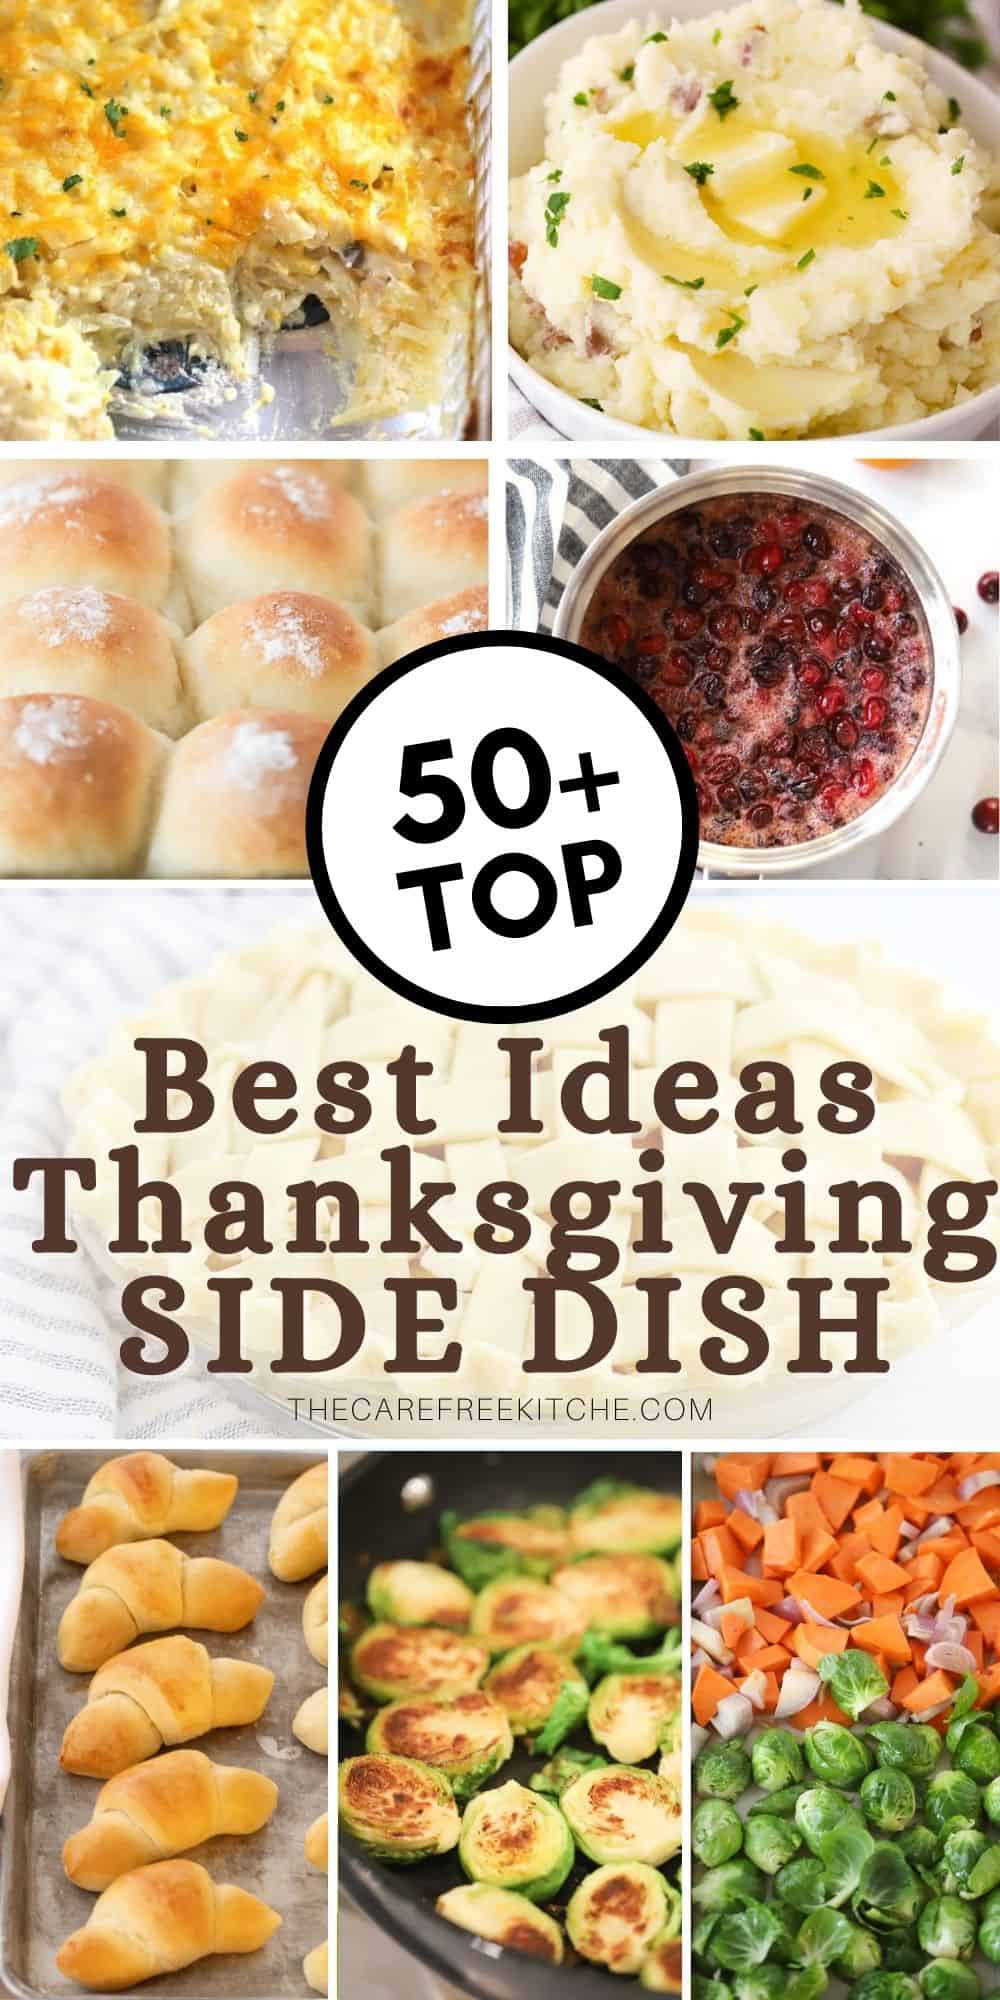 Best Thanksgiving Side Dishes - The Carefree Kitchen